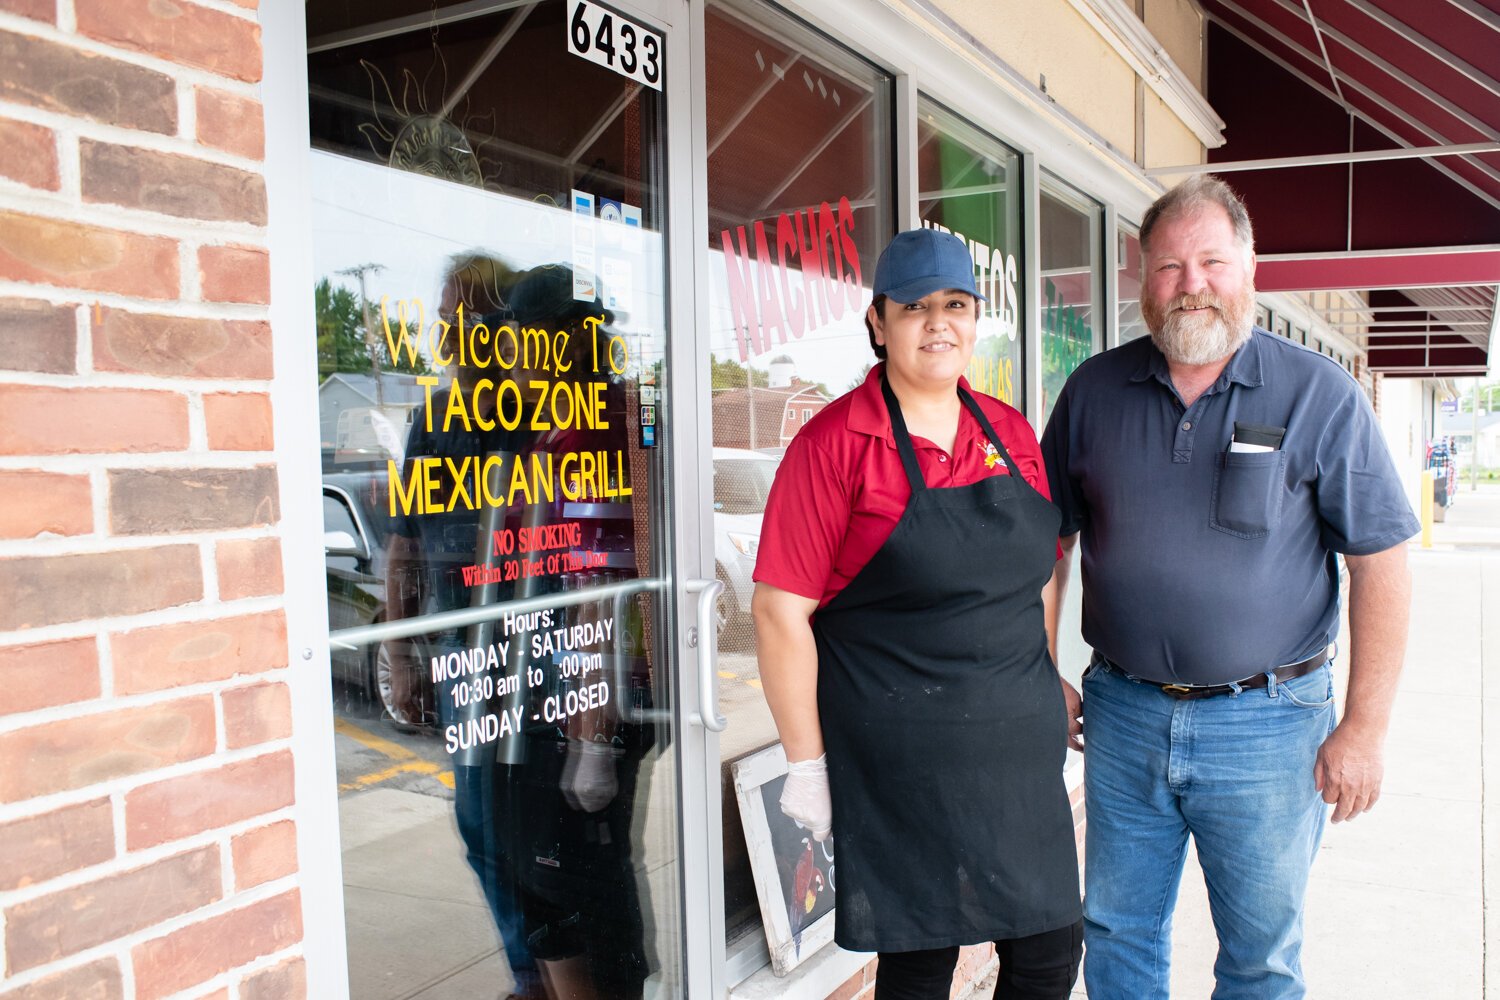 Wood Farms' owner Dennis Wood sells beef and pork to local restauranteurs, like Lizet Colin, Owner of Taco Zone at 6433 Bluffton Rd.